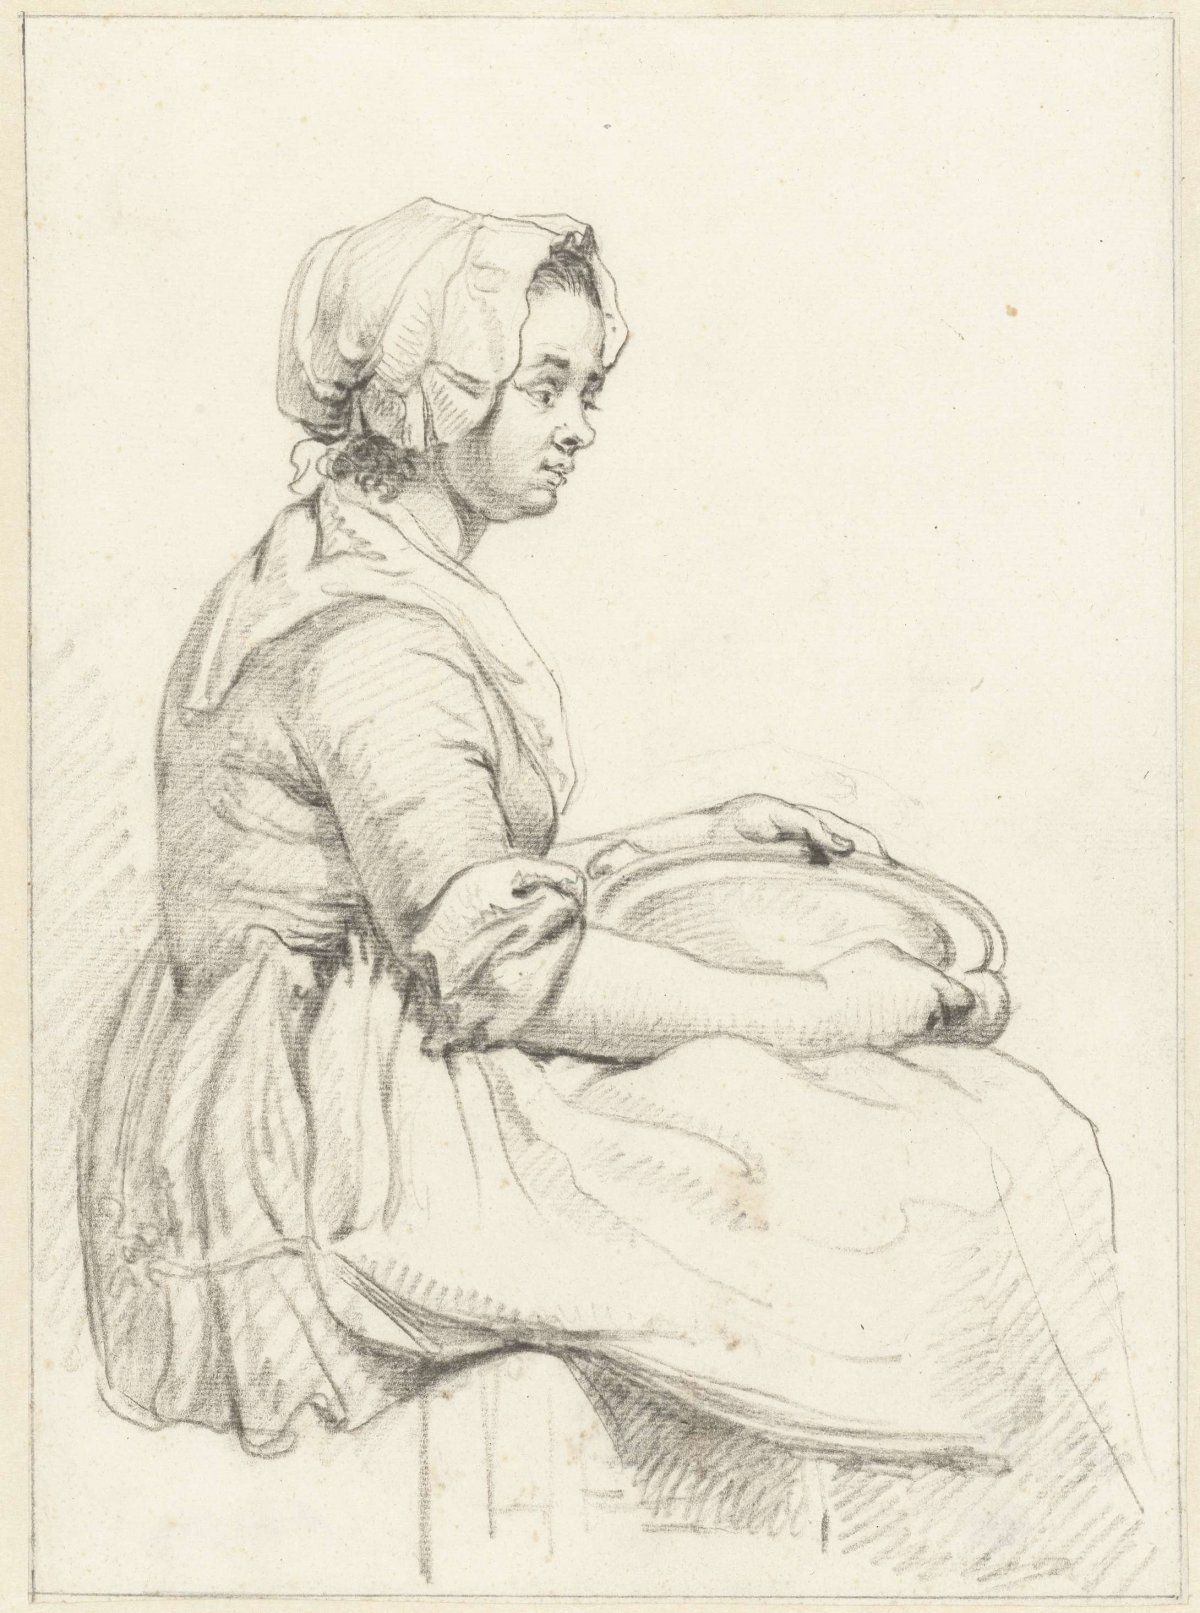 Seated woman with a dish on her lap, to the right, Abraham van Strij (I), 1763 - 1826